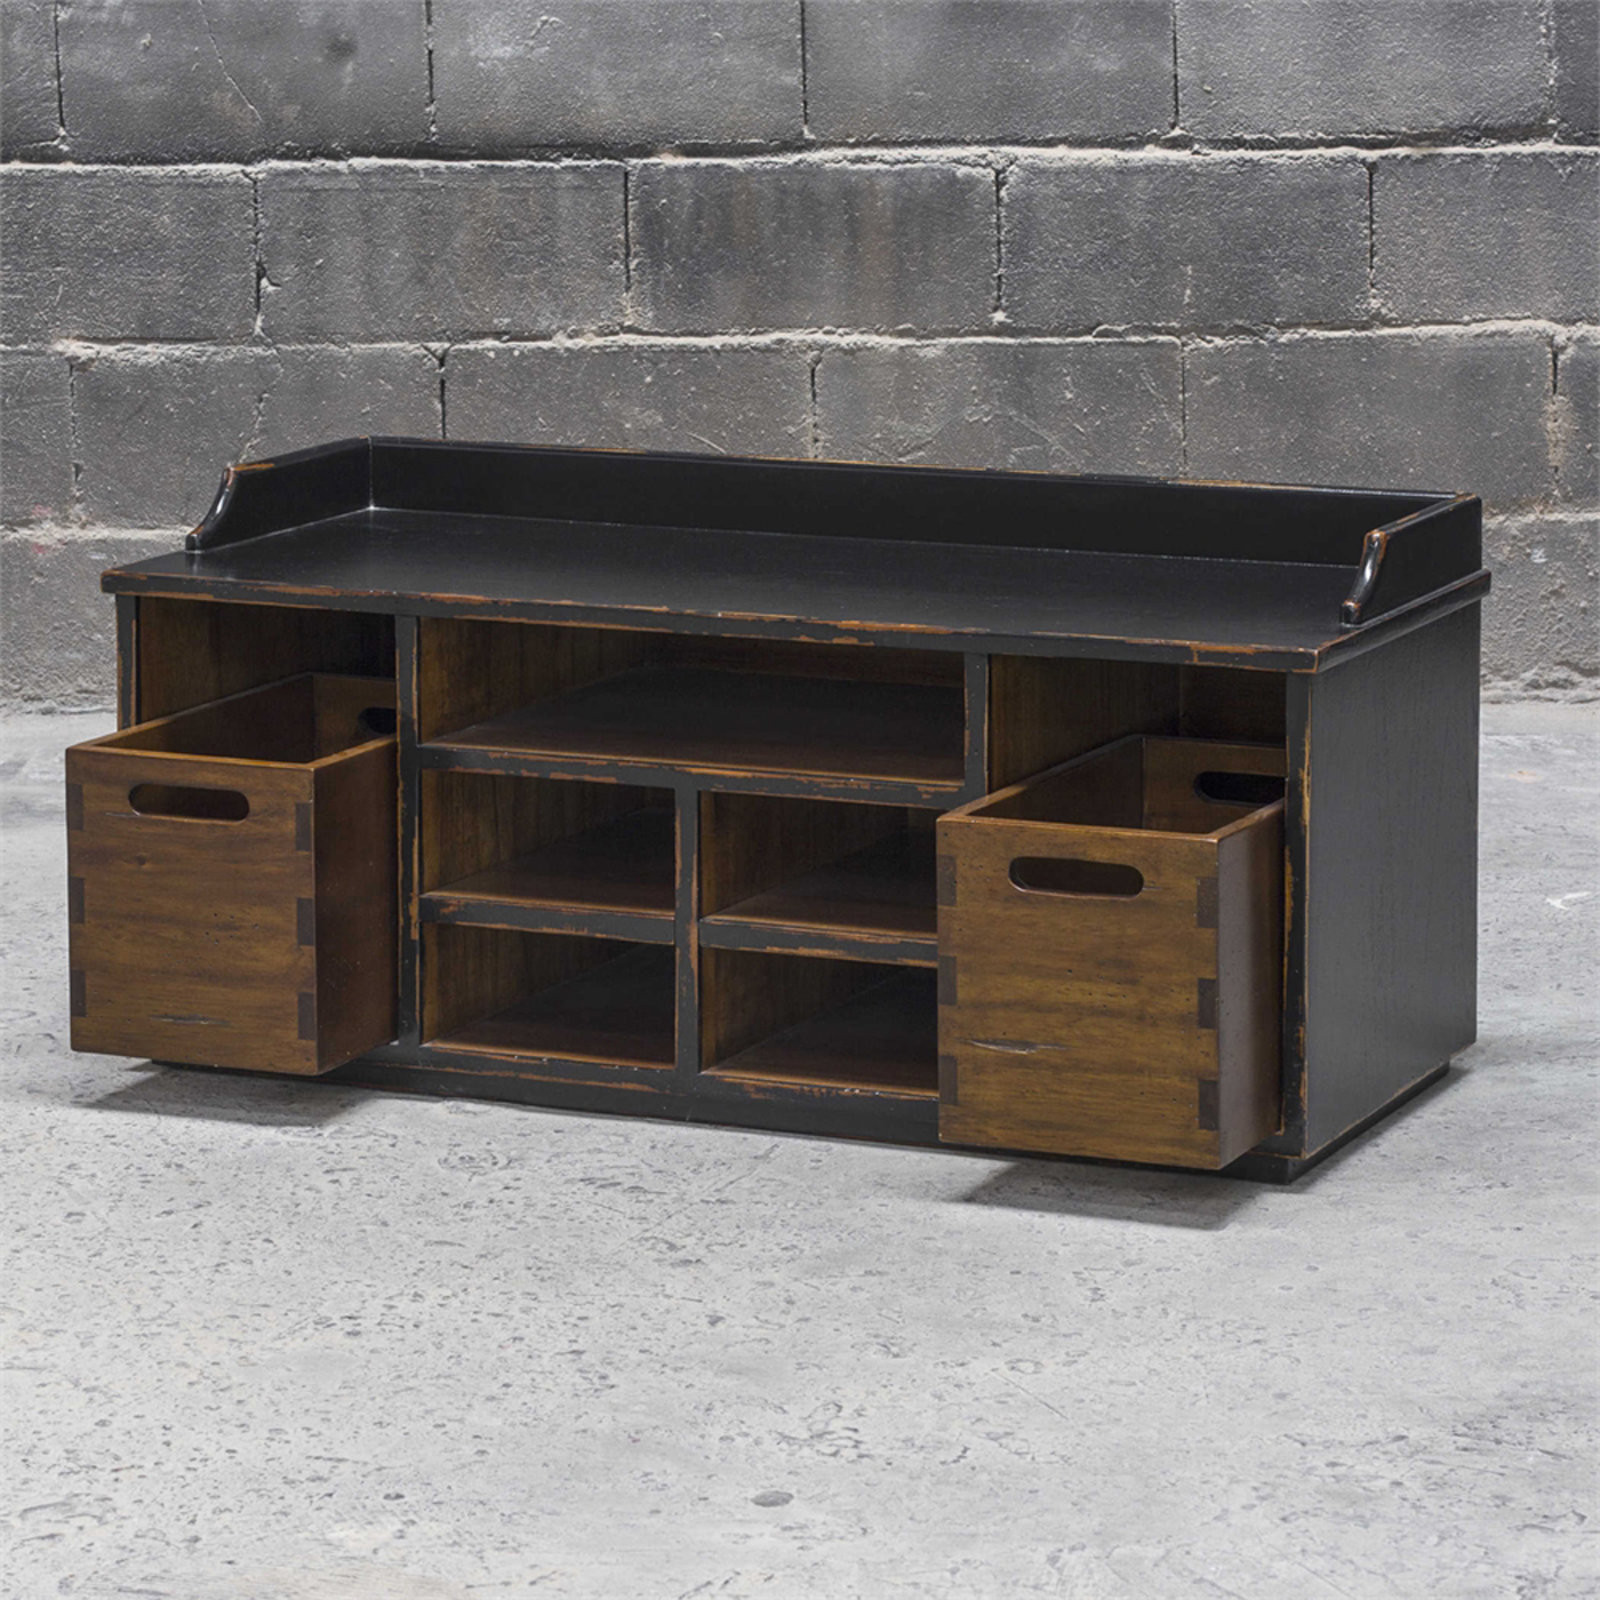 Cubby Storage Bench
 Rustic Wood Cubby Bench Shades of Light